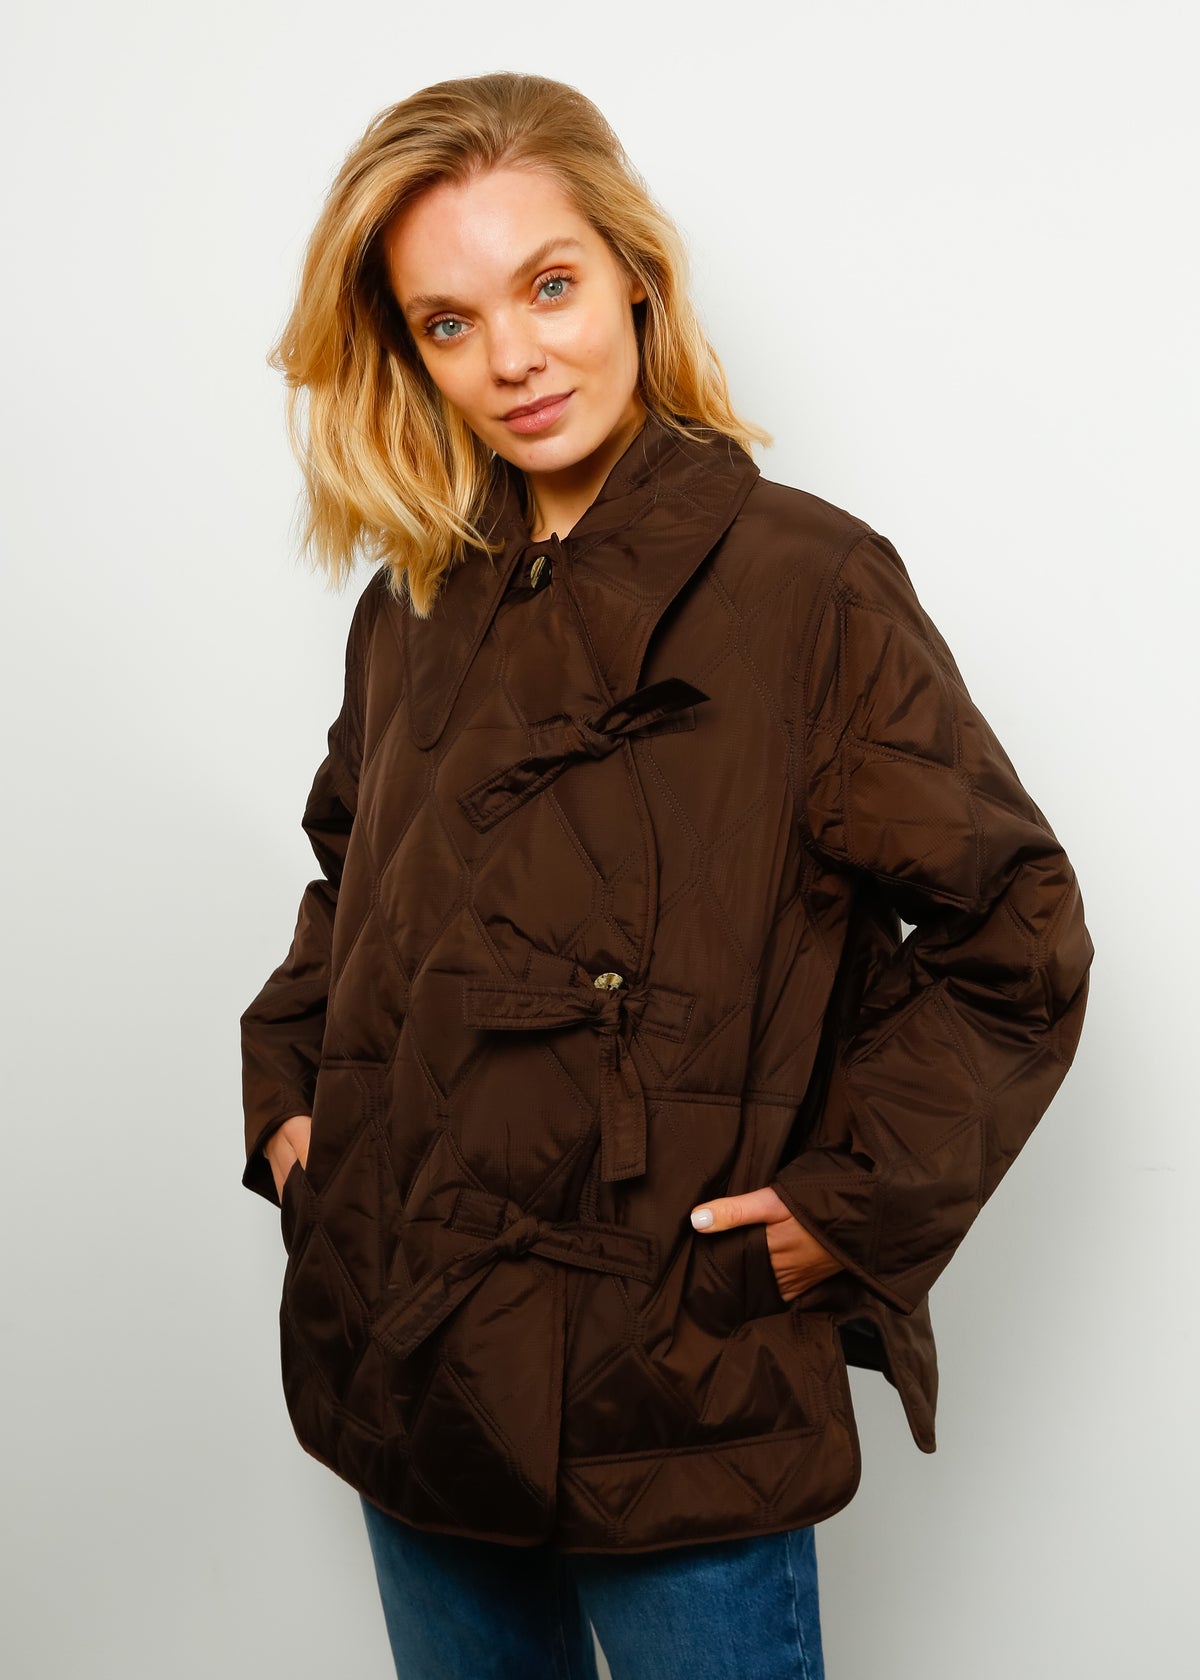 GANNI F7445 Ripstop Quilt Jacket in Mole